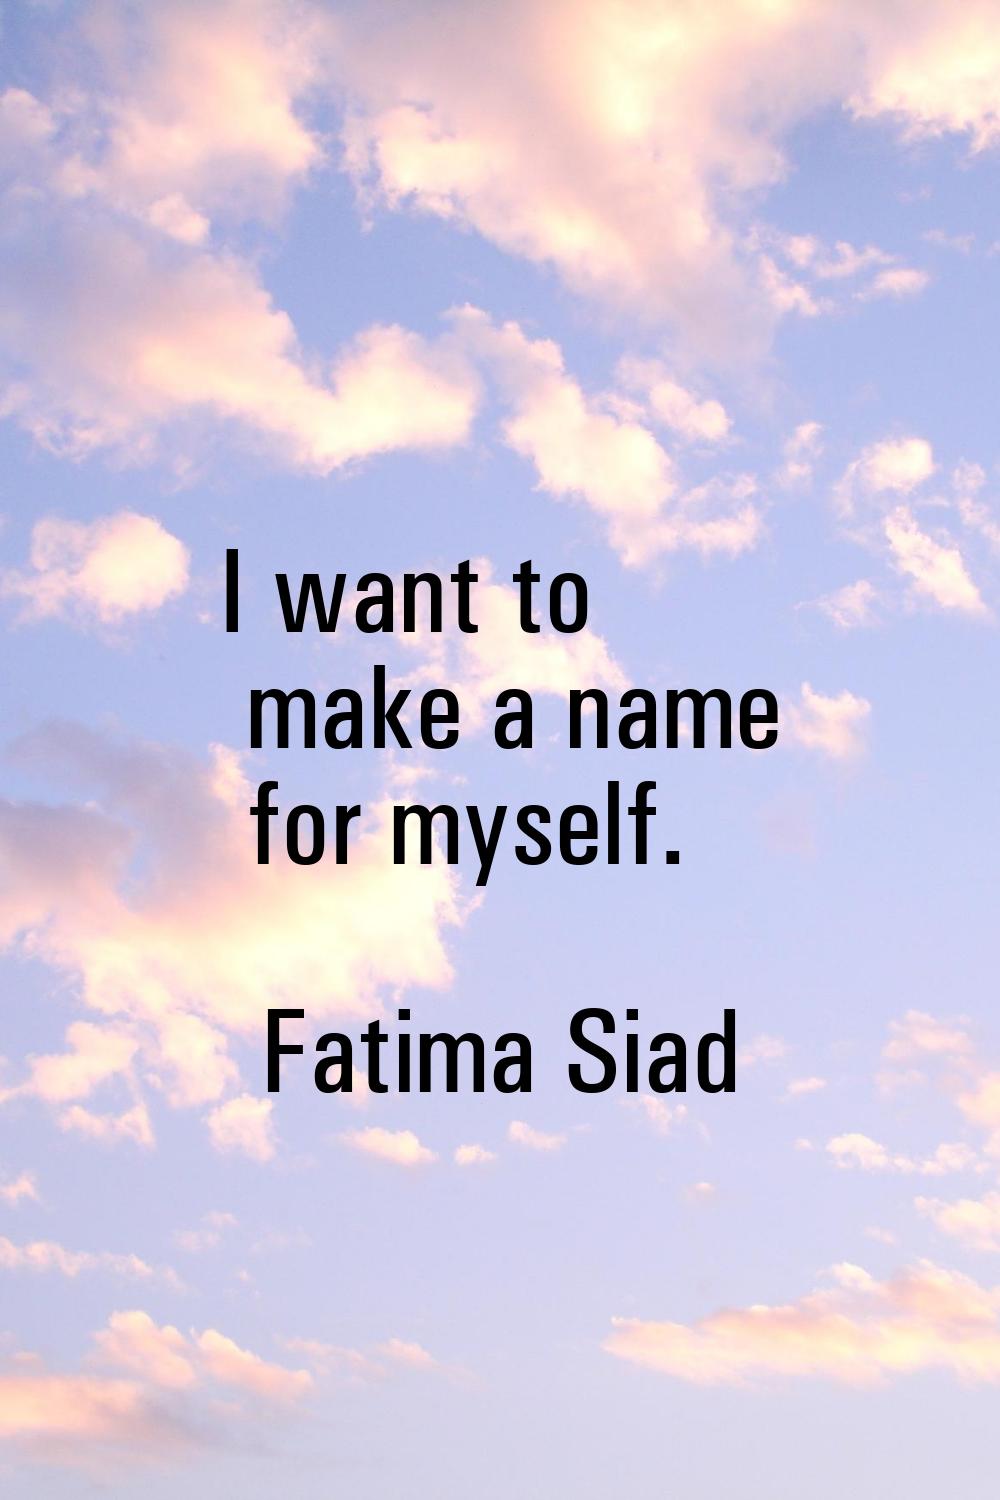 I want to make a name for myself.